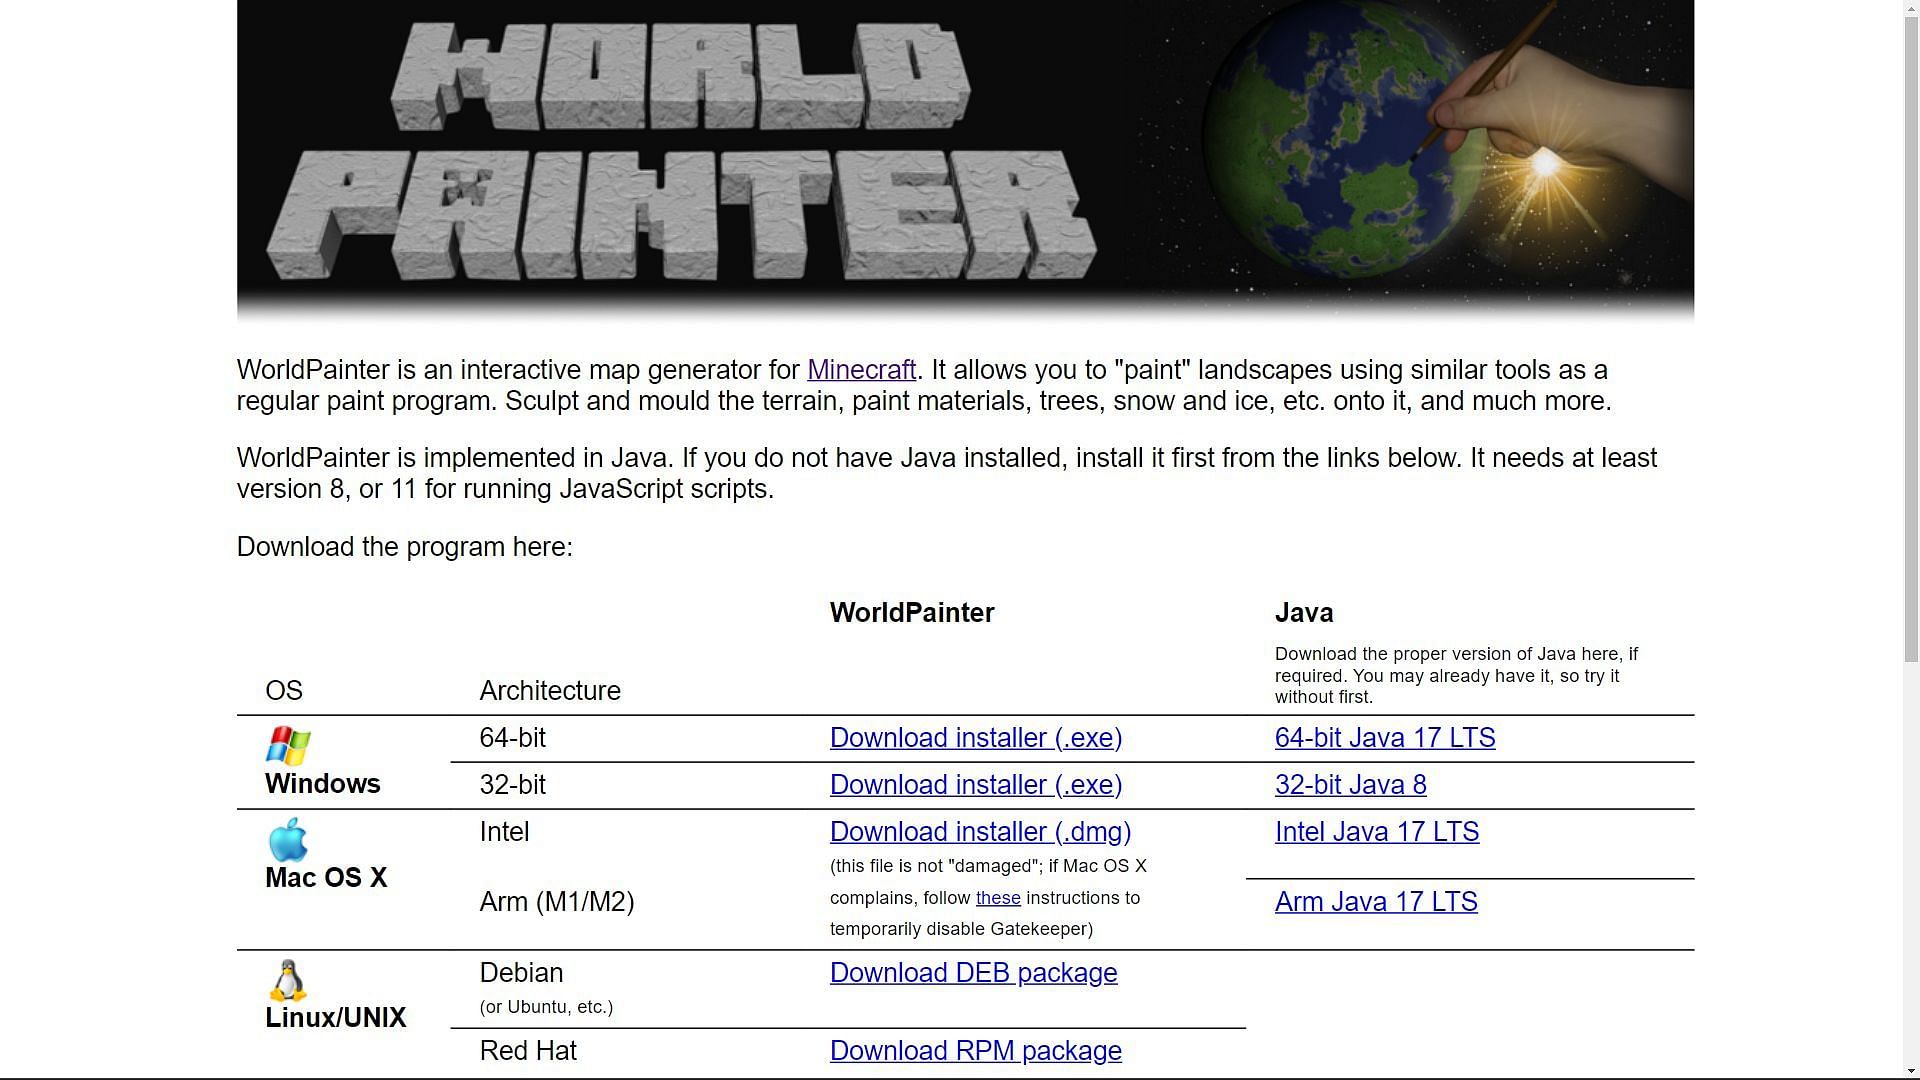 WorldPainter website from which players can download the software to use for Minecraft (Image via Sportskeeda)